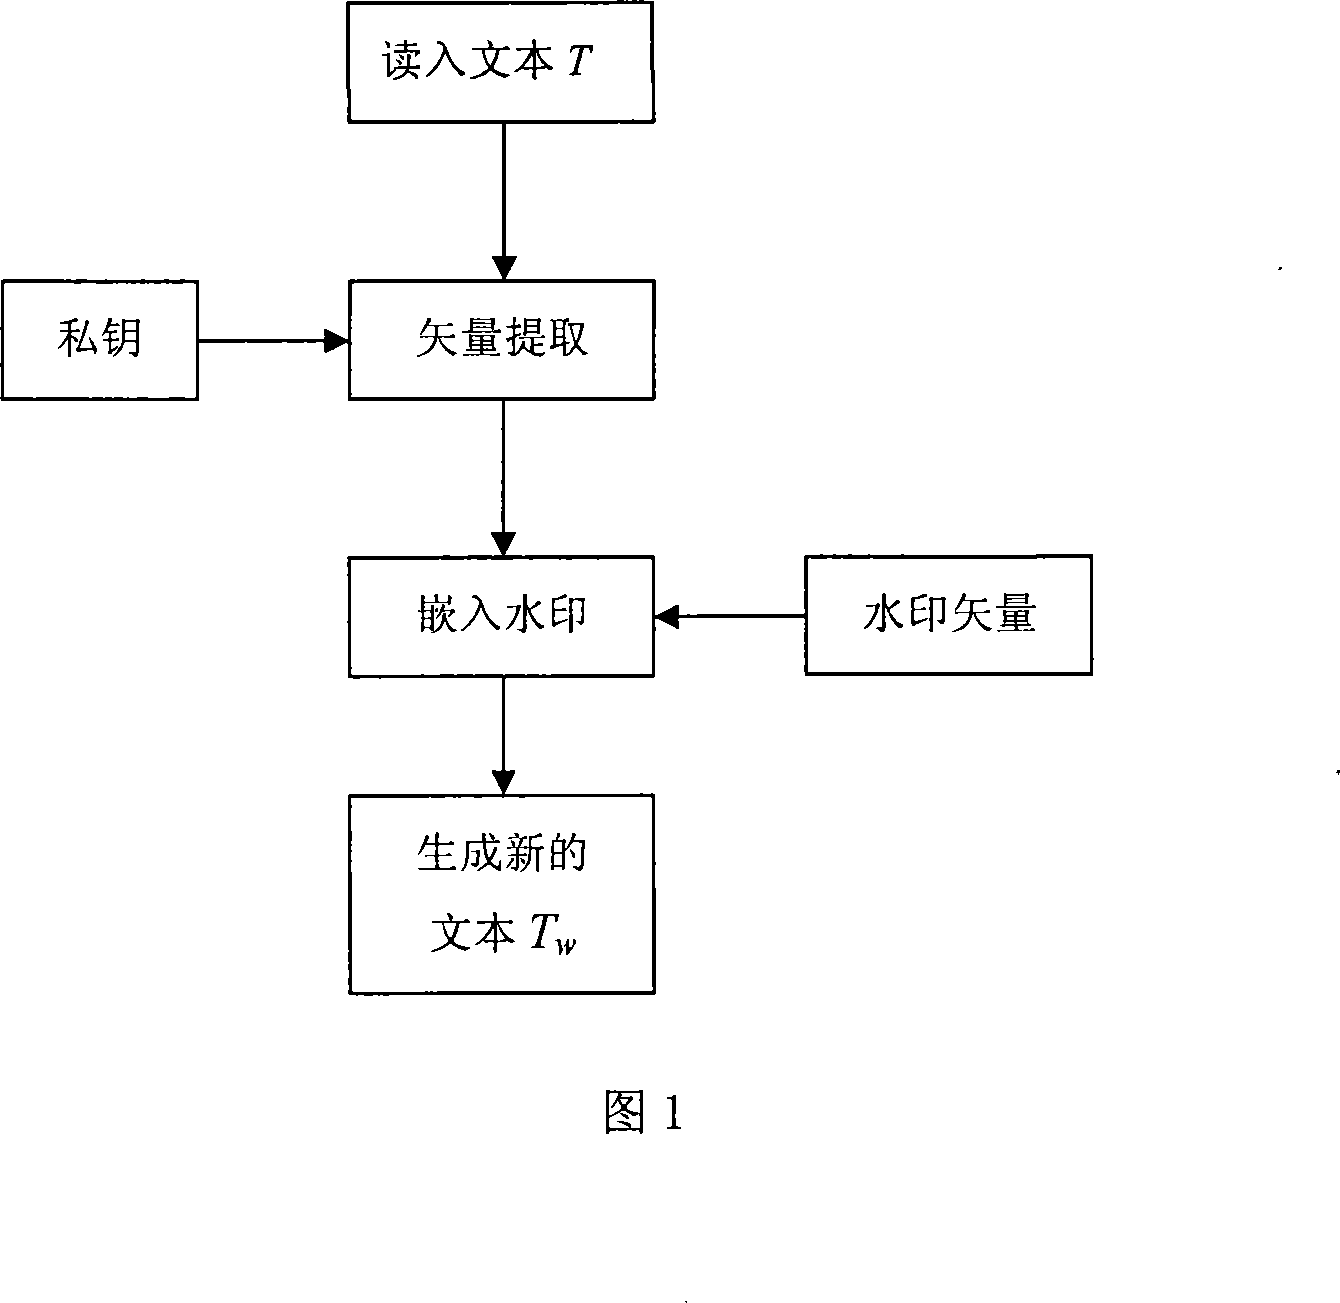 Method for embedding and extracting frequency domain water mark in English text